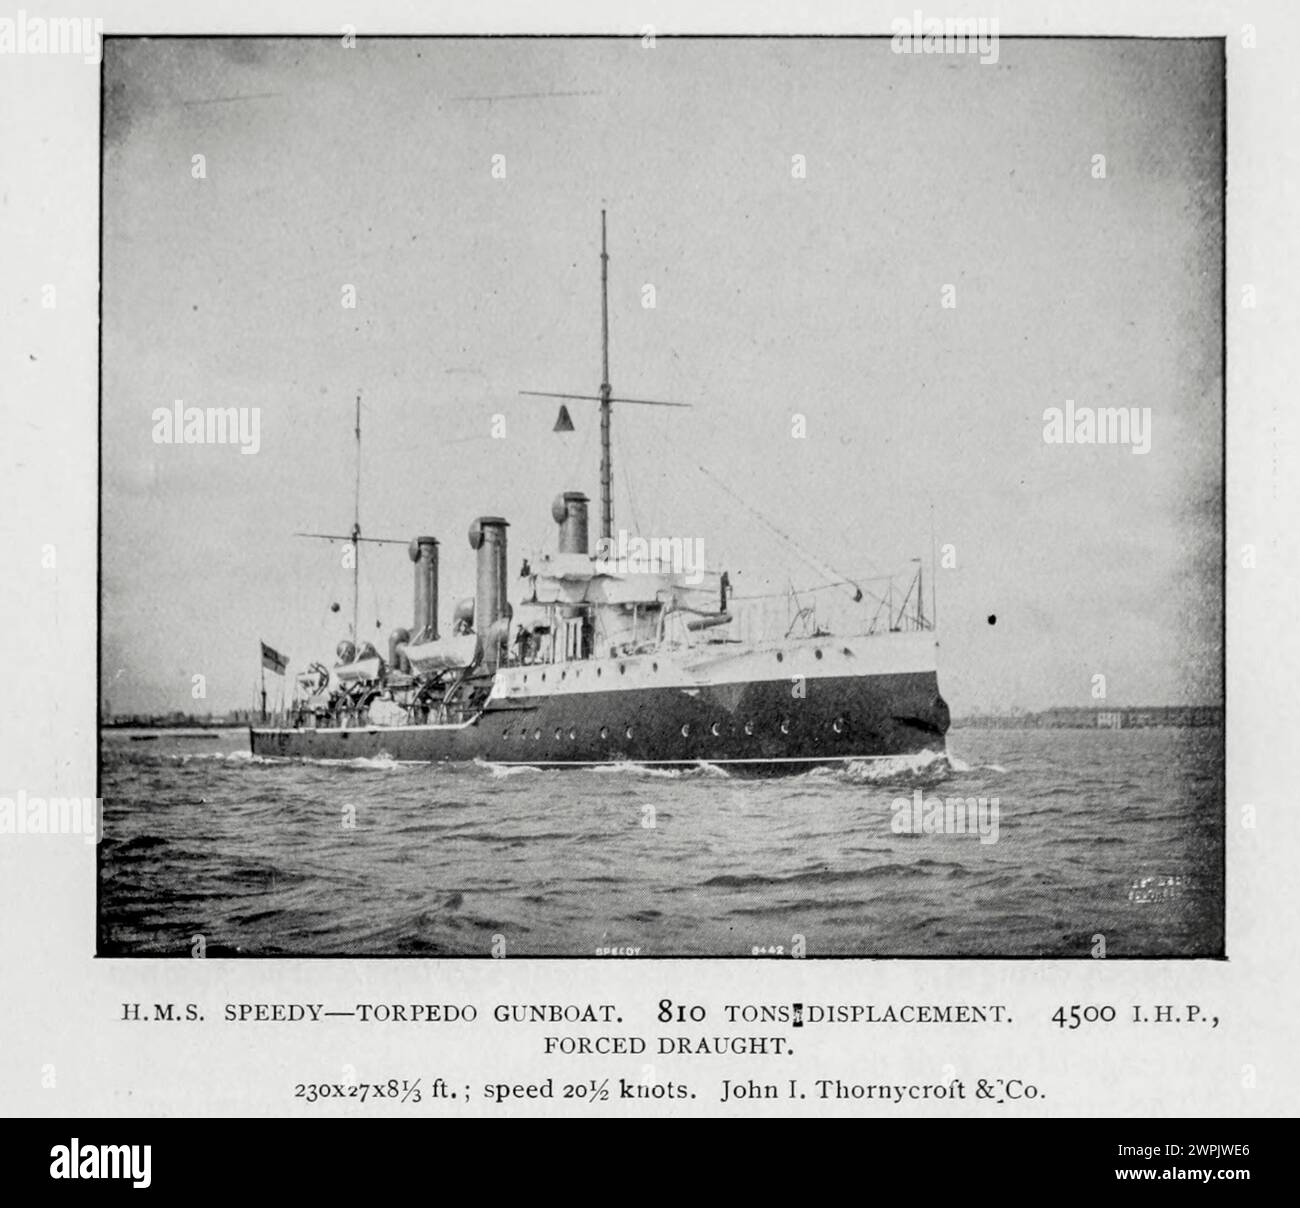 H.M.S. SPEEDY - TORPEDO GUNBOAT. 81O TONS DlSPLACEMENT. 45OO I.H.P., FORCED DRAUGHT. 230x27x8 ft. ; speed 20.5 knots. John I, Thornycroft & Co. from the Article THE DEVELOPMENT OF THE TORPEDO-BOAT DESTROYER.By John Platt. from The Engineering Magazine Devoted to Industrial Progress Volume XV 1898 The Engineering Magazine Co Stock Photo